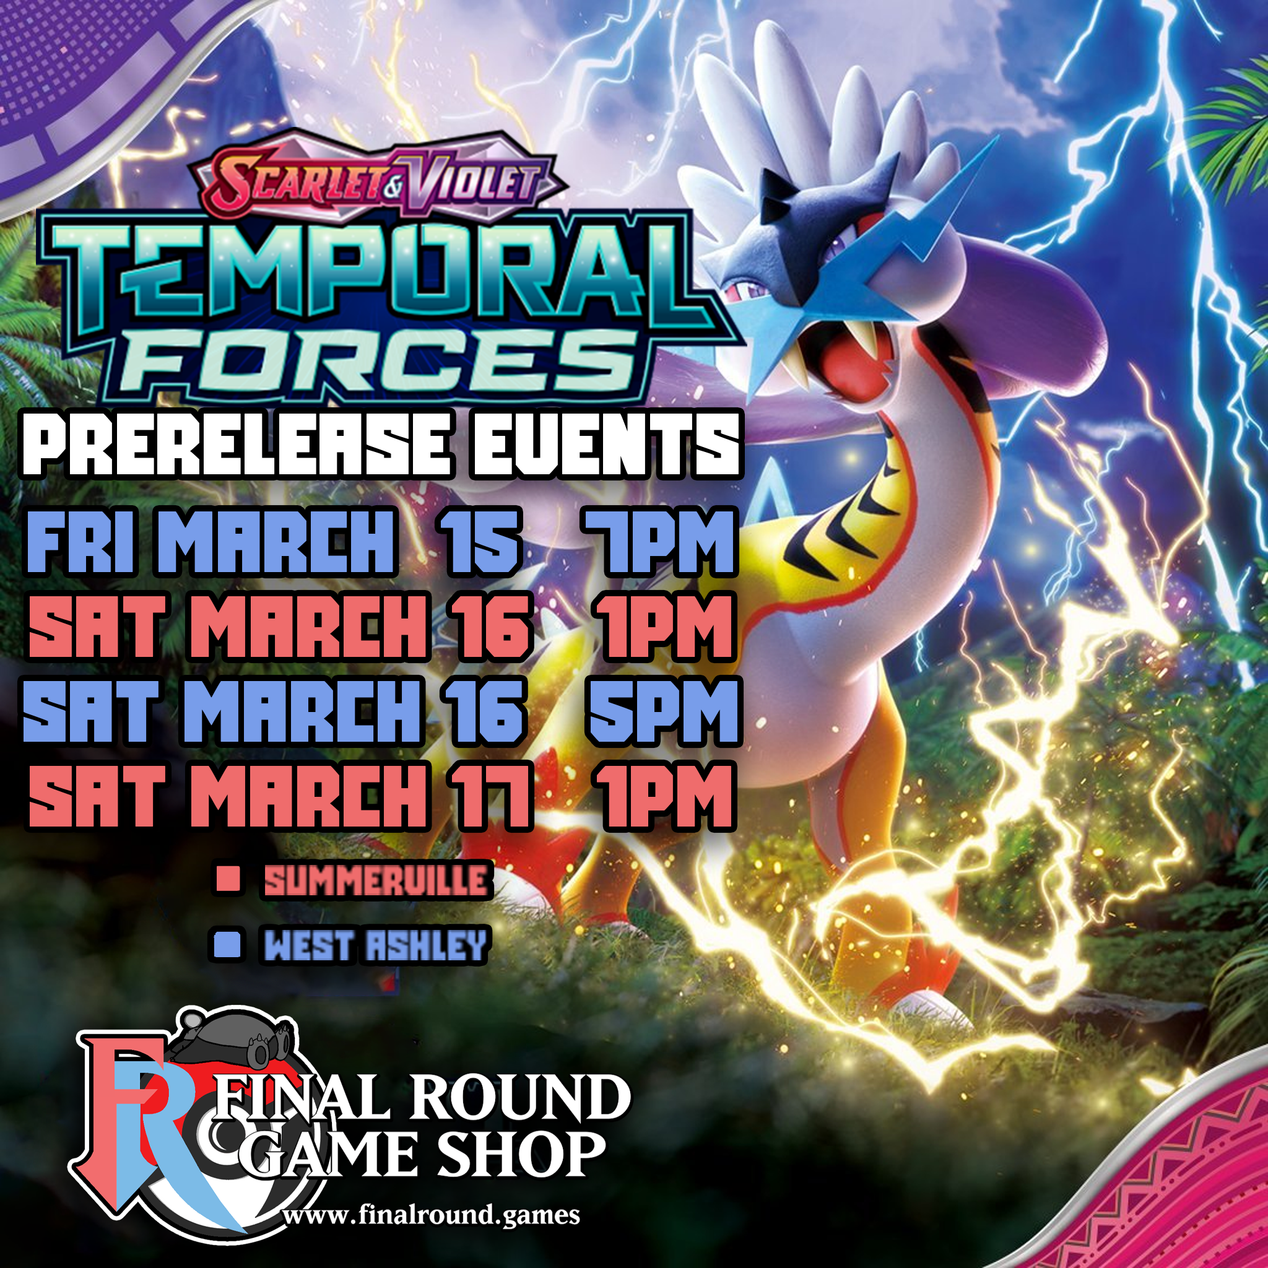 Pokémon Temporal Forces Prerelease and Pre-orders